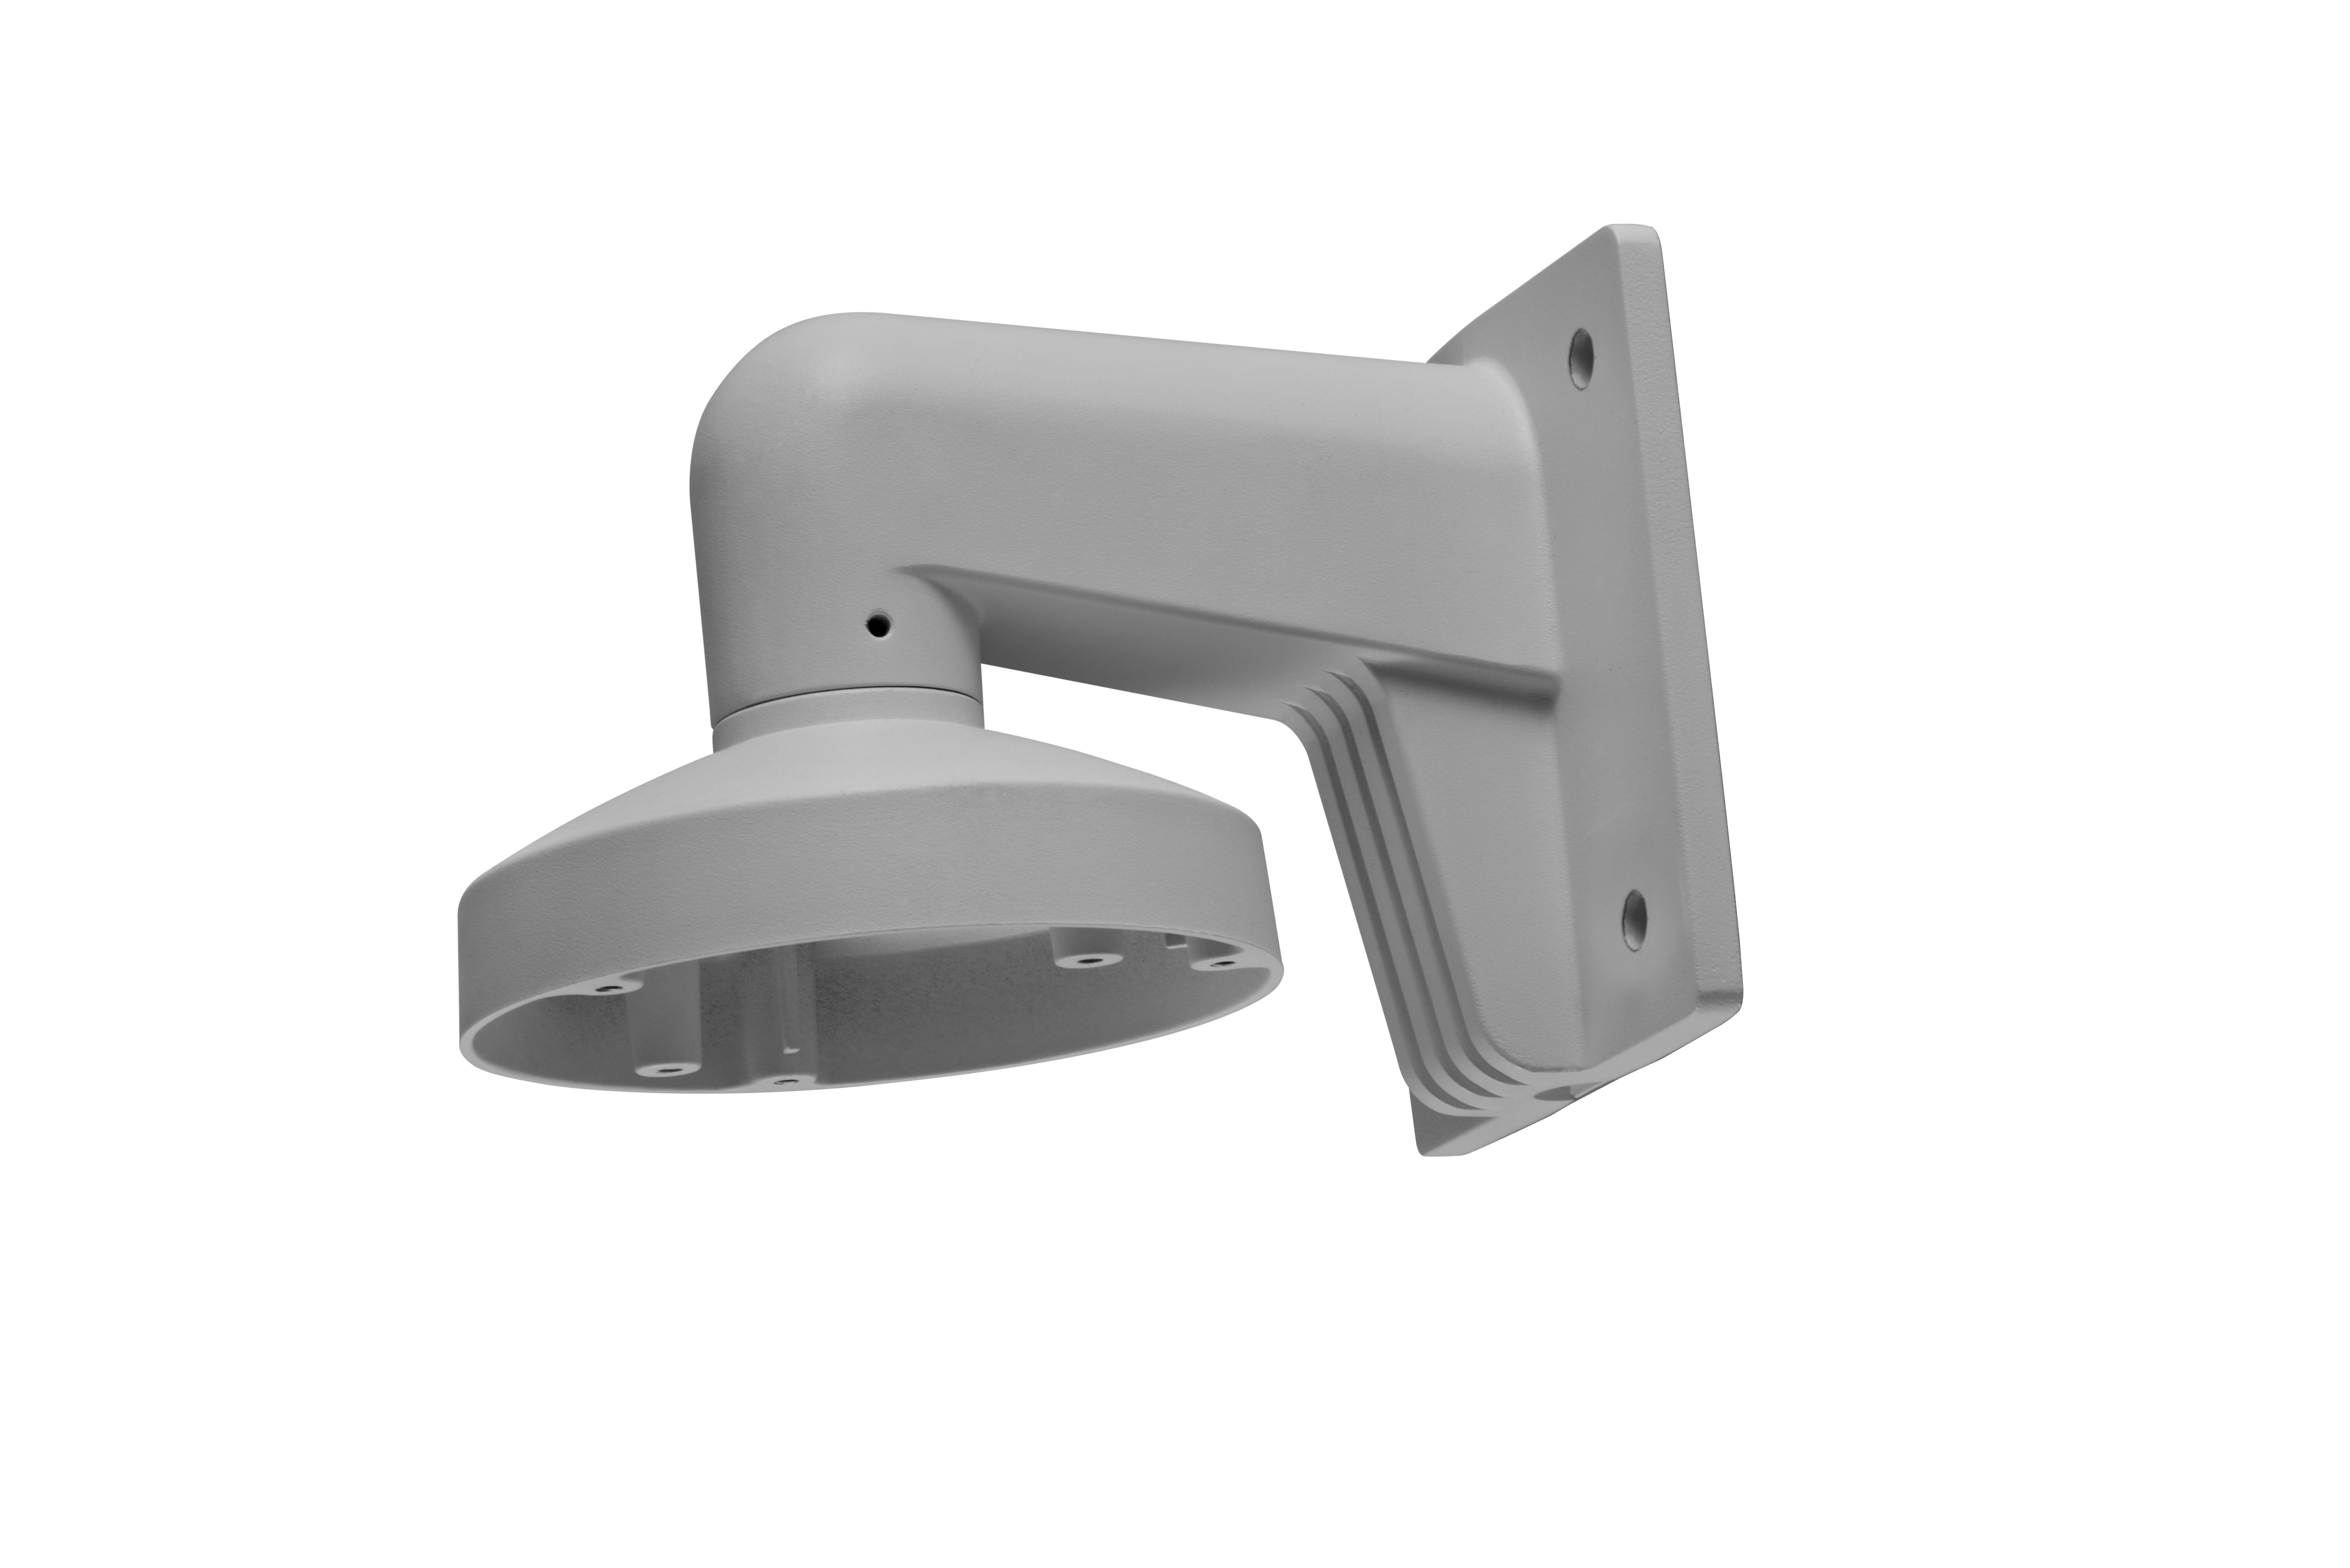 Hikvision - Support murale pour dome